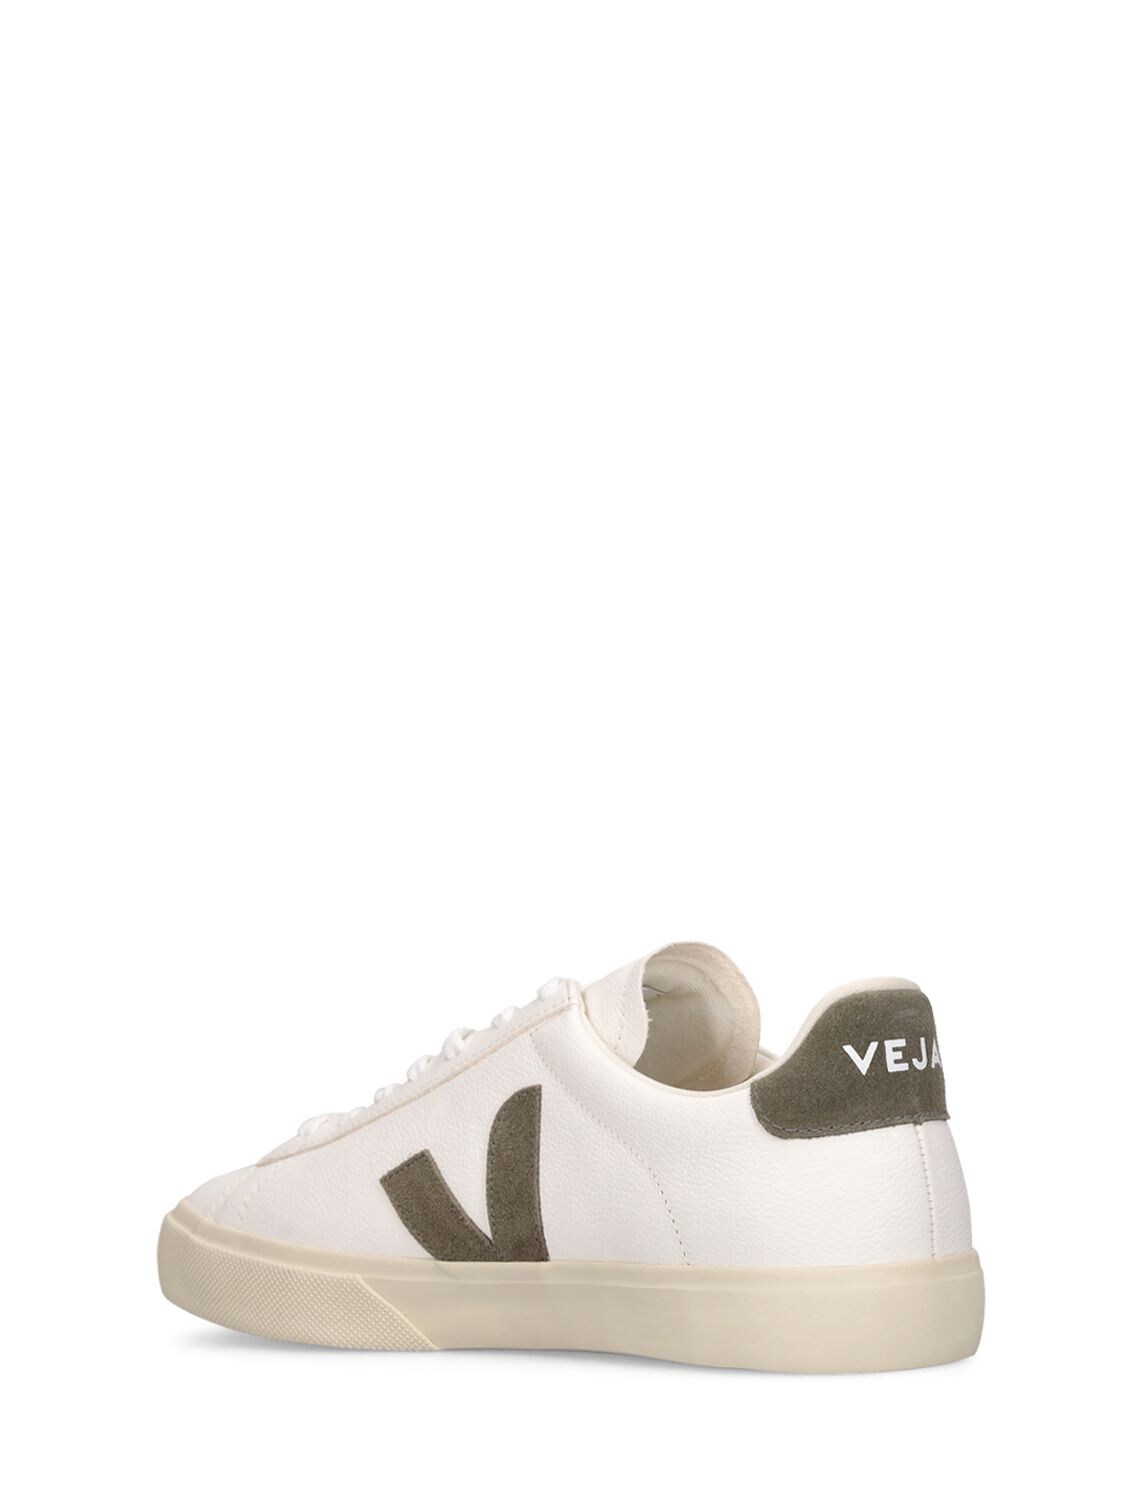 Shop Veja 20mm Campo Leather Sneakers In White Khaki